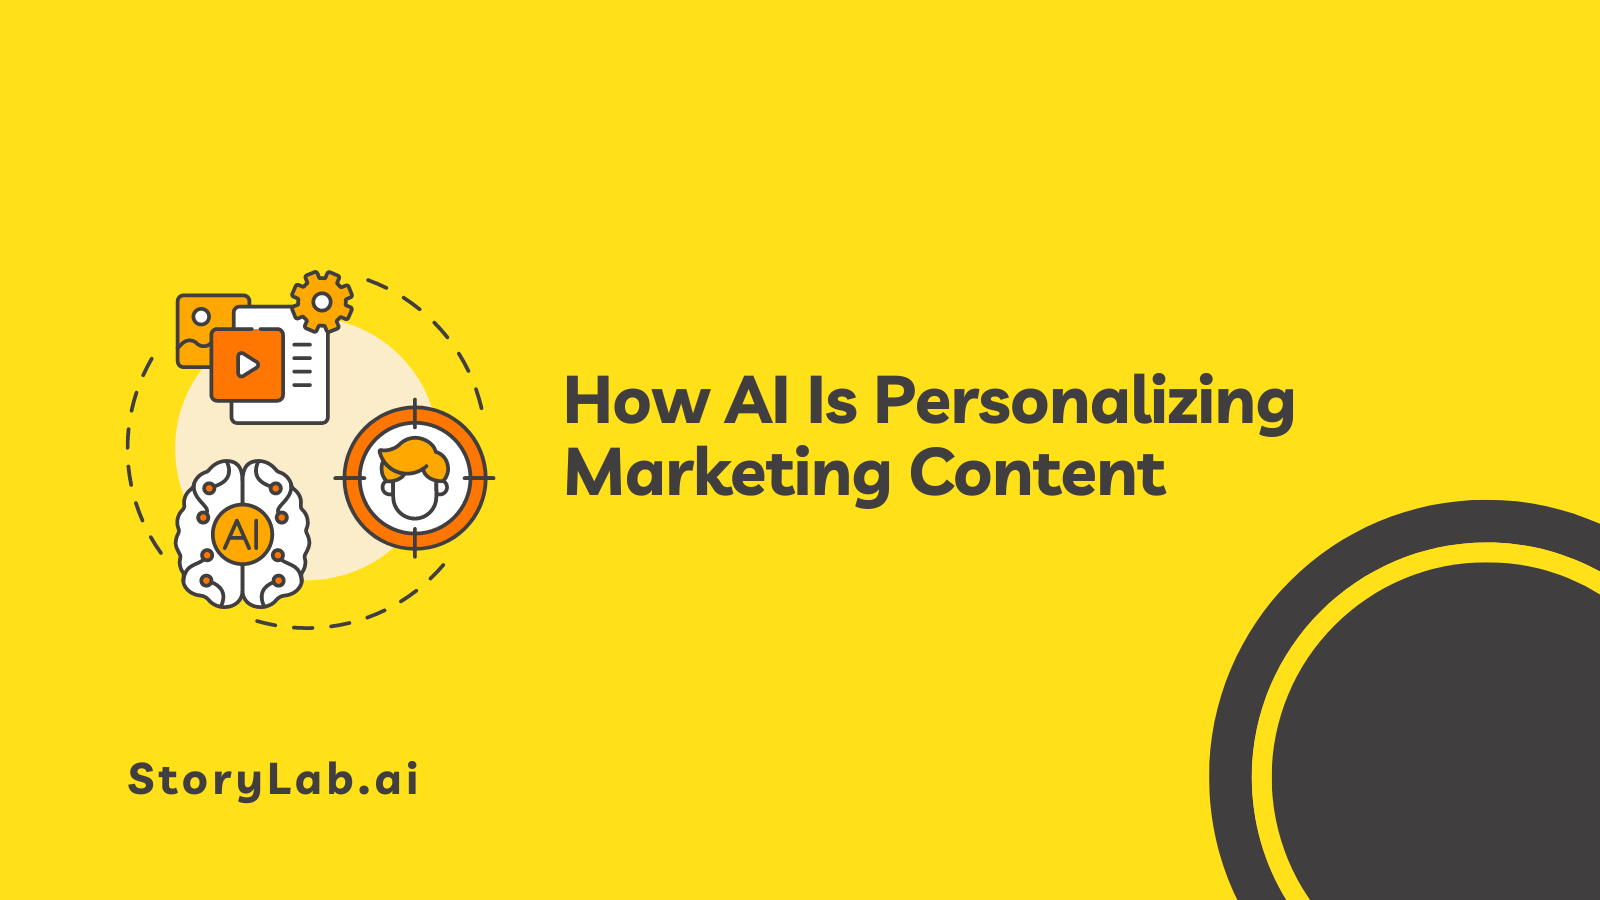 How AI Is Personalizing Marketing Content